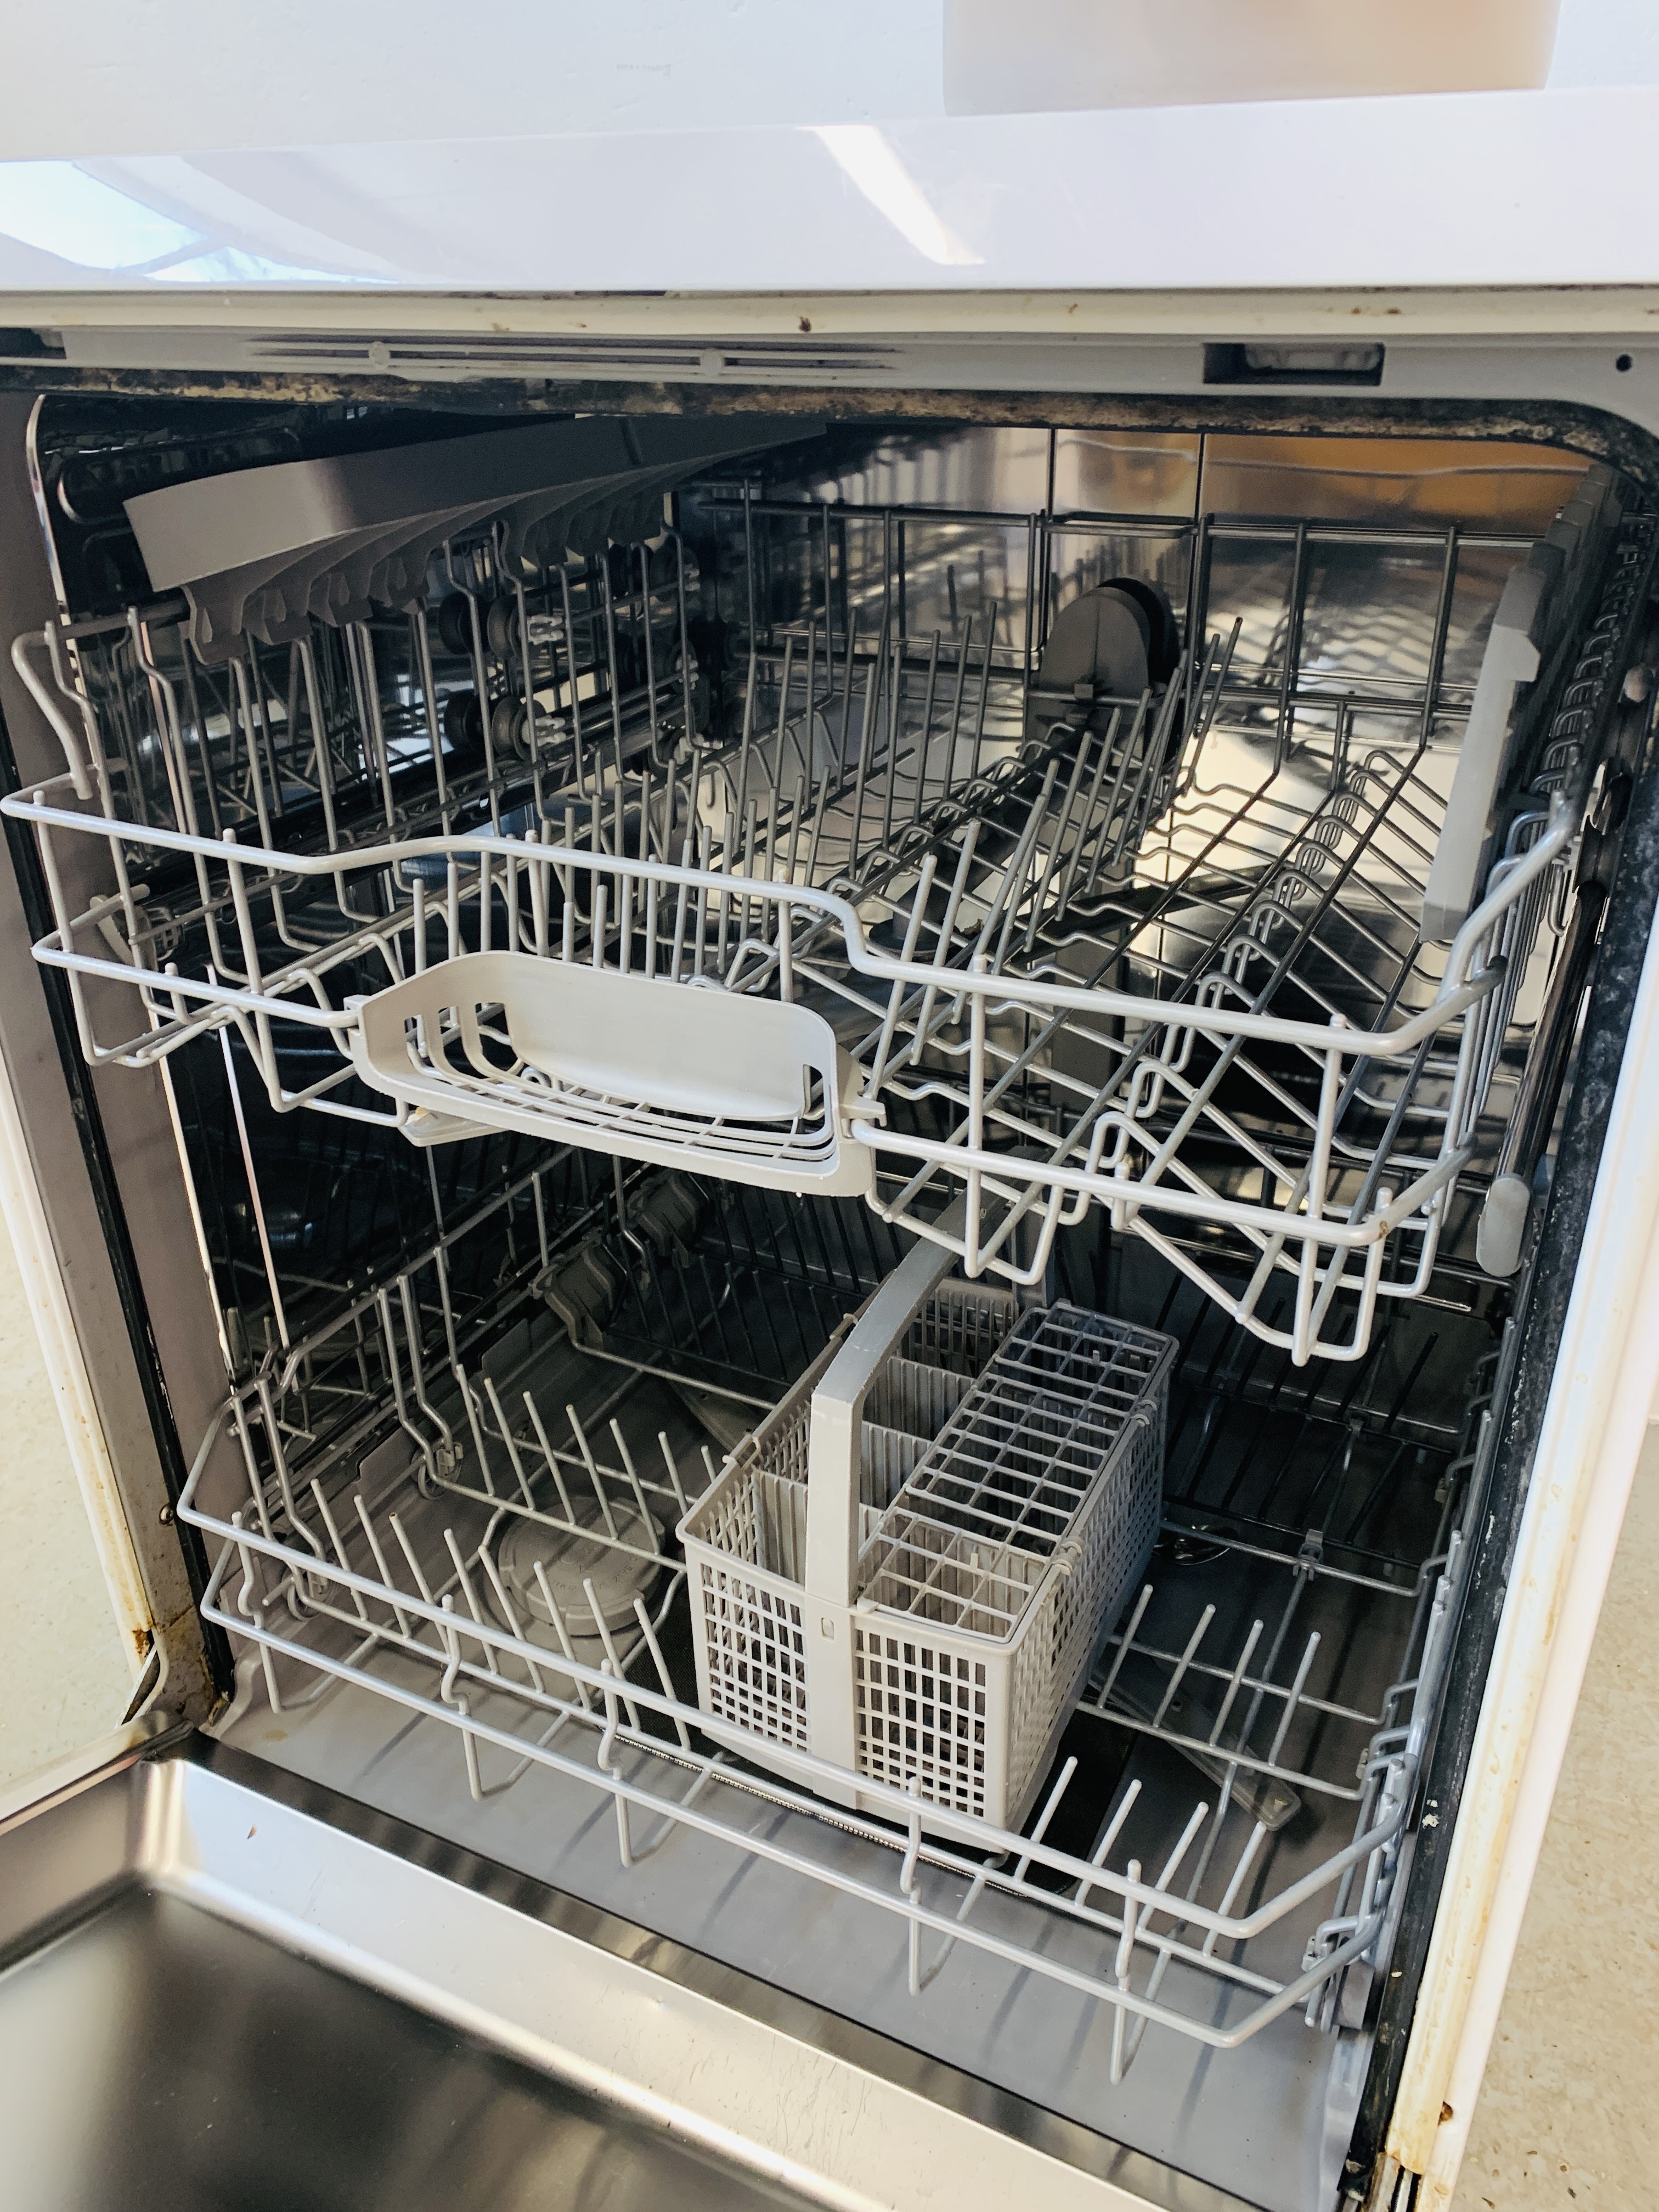 A BOSCH DISH WASHER - SOLD AS SEEN - Image 7 of 8